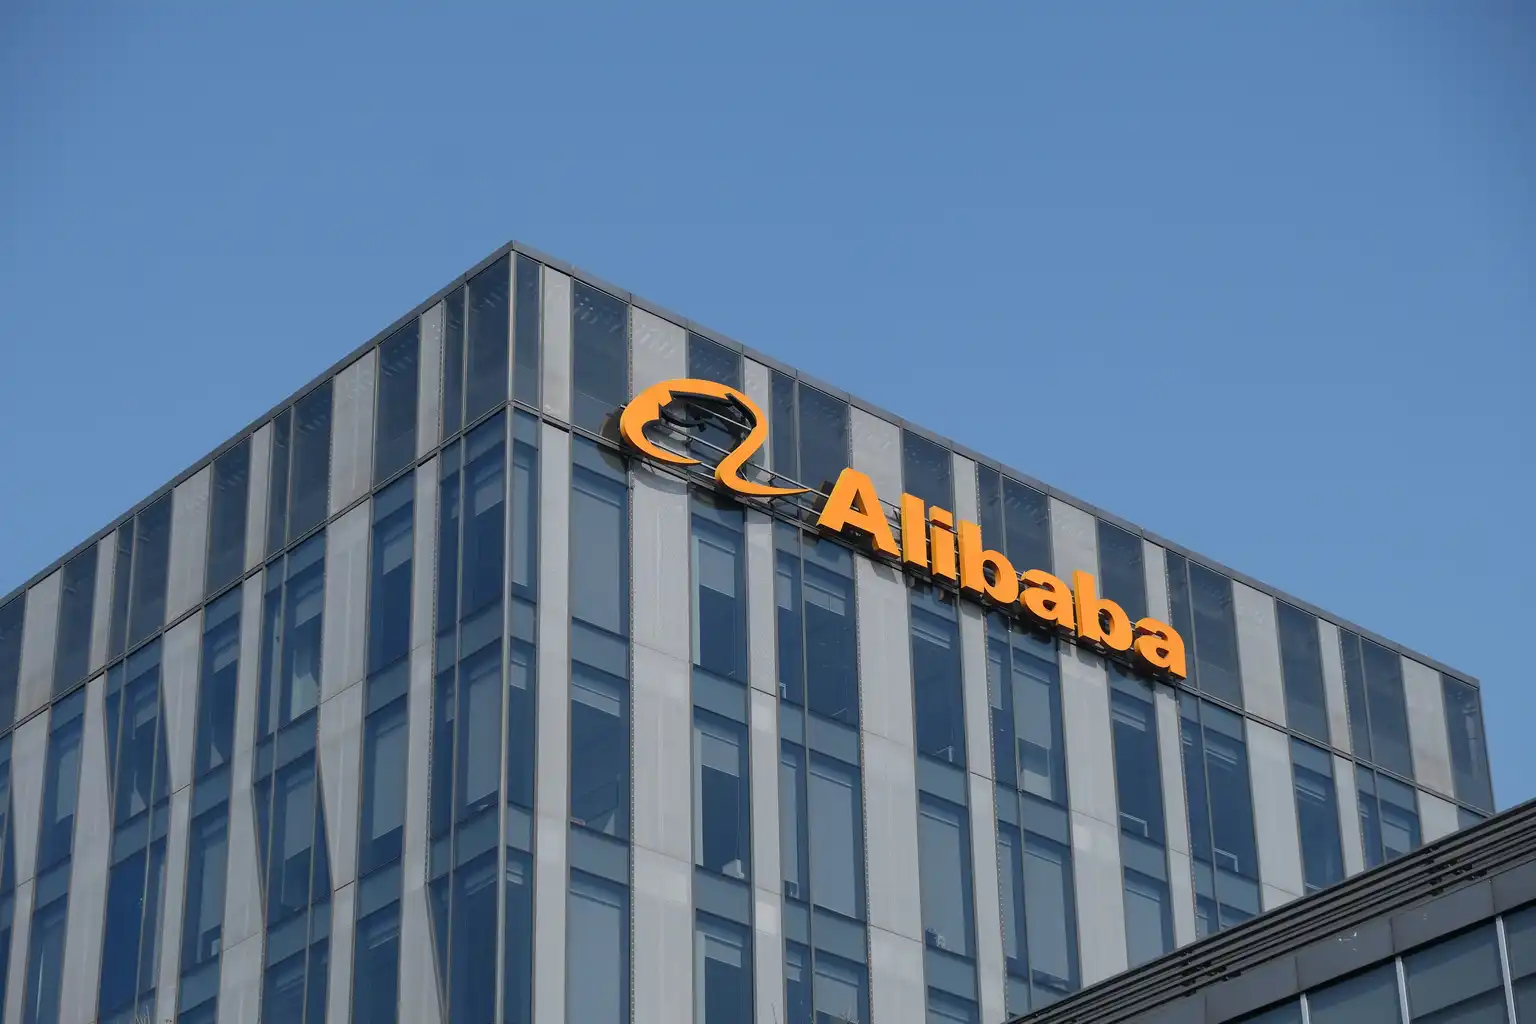 Alibaba: Let's Clear Up Some Misconceptions - Seeking Alpha